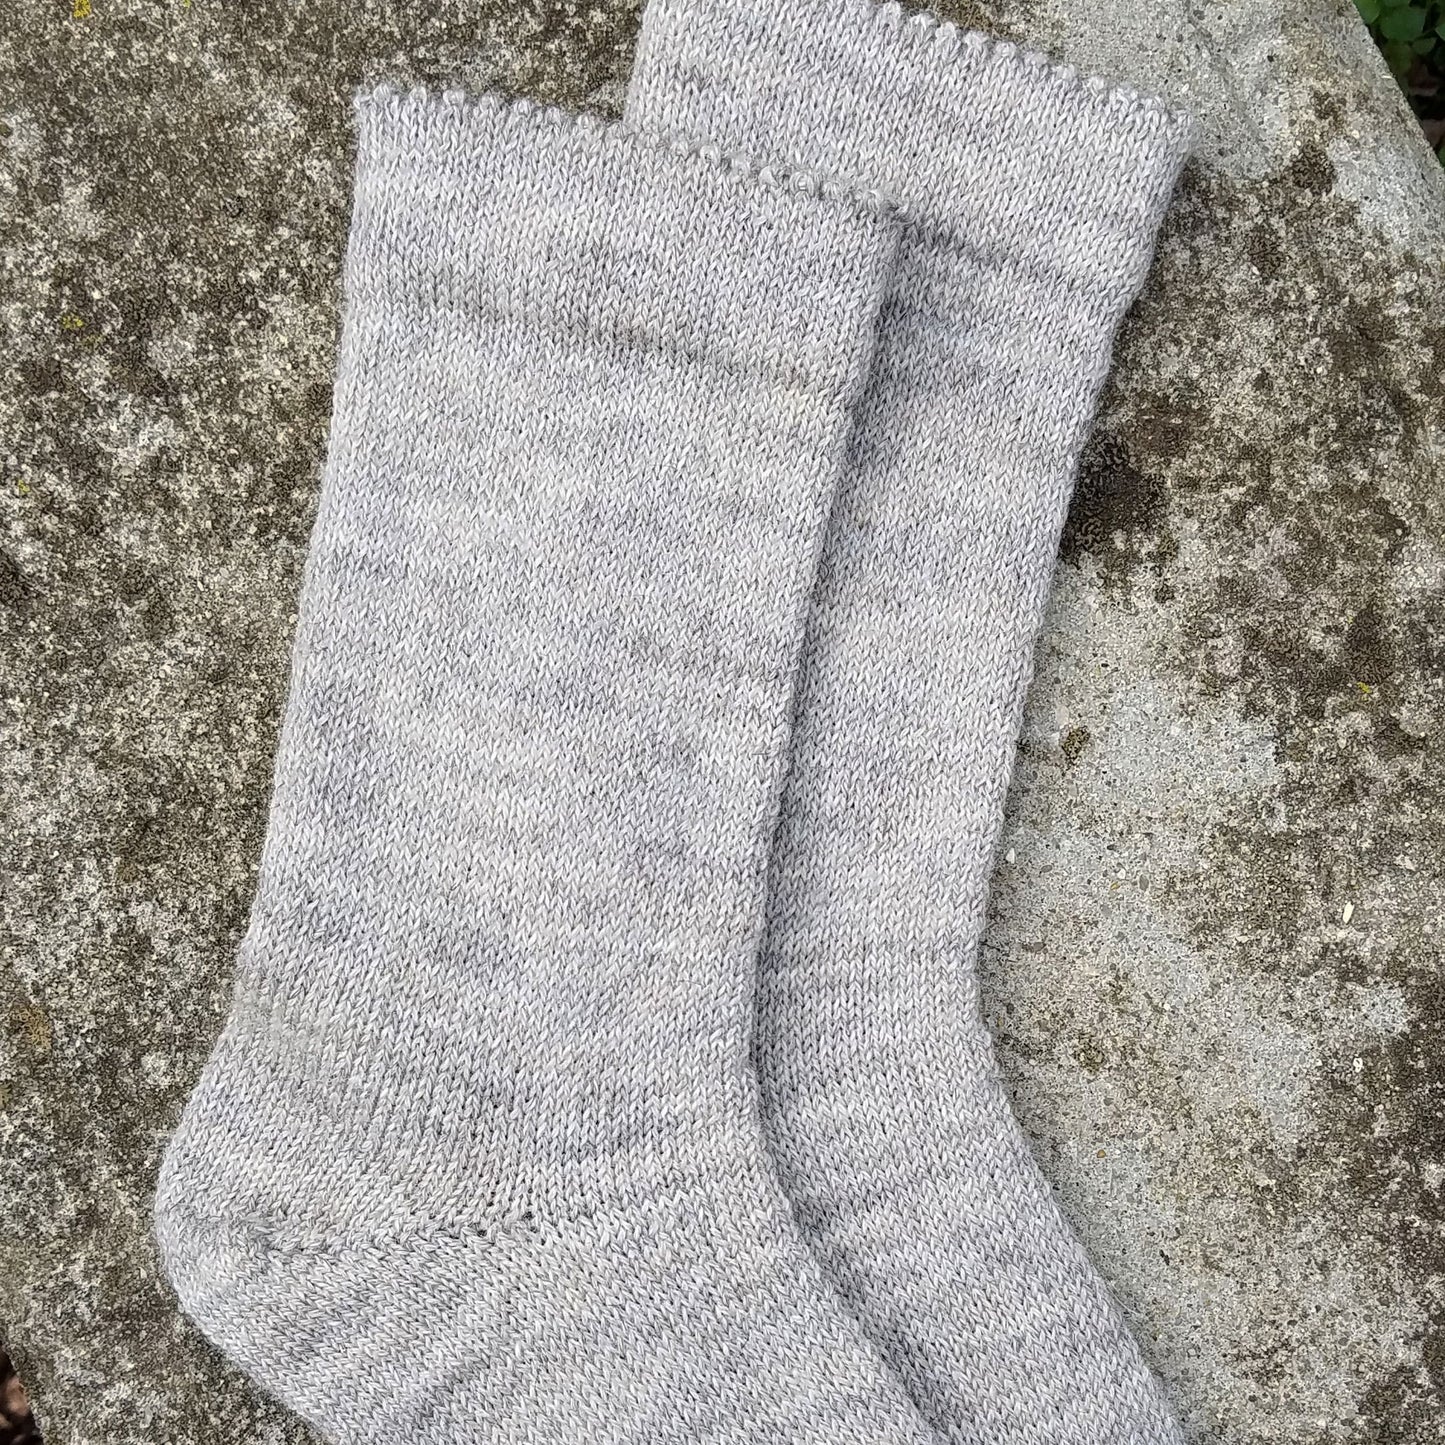 United States, Kathleen Oliver / Sweet Tree Hill Farm, Shepherd’s Simply Socks in Natural Silver Gotland Wool with Picot Edge